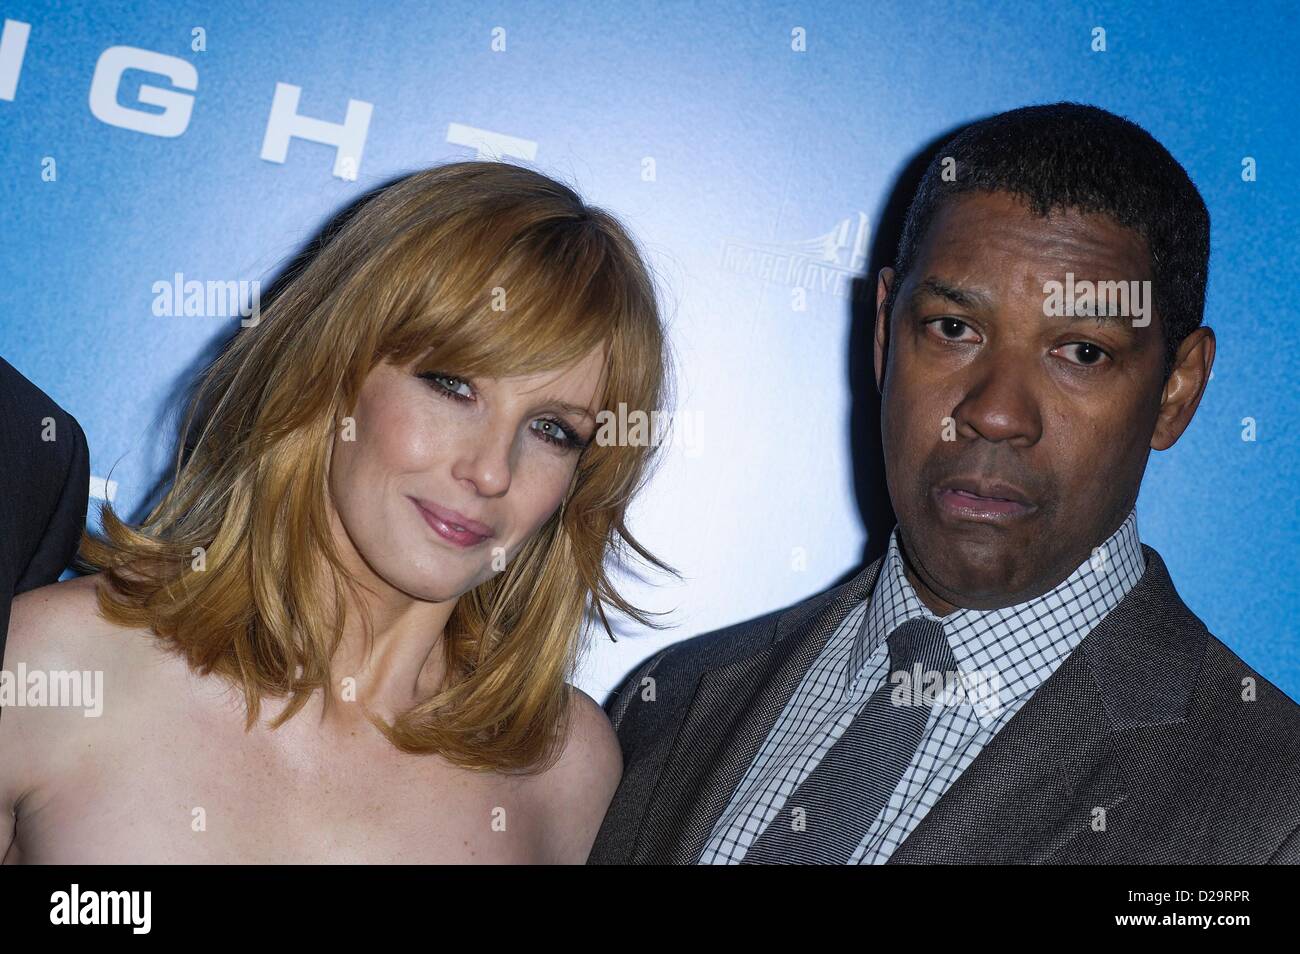 Cast attends the Flight - UK Premiere on 17/01/2013 at The Empire Leicester Square, London. Persons pictured: Denzel Washington, Kelly Reilly. Picture by Julie Edwards Stock Photo